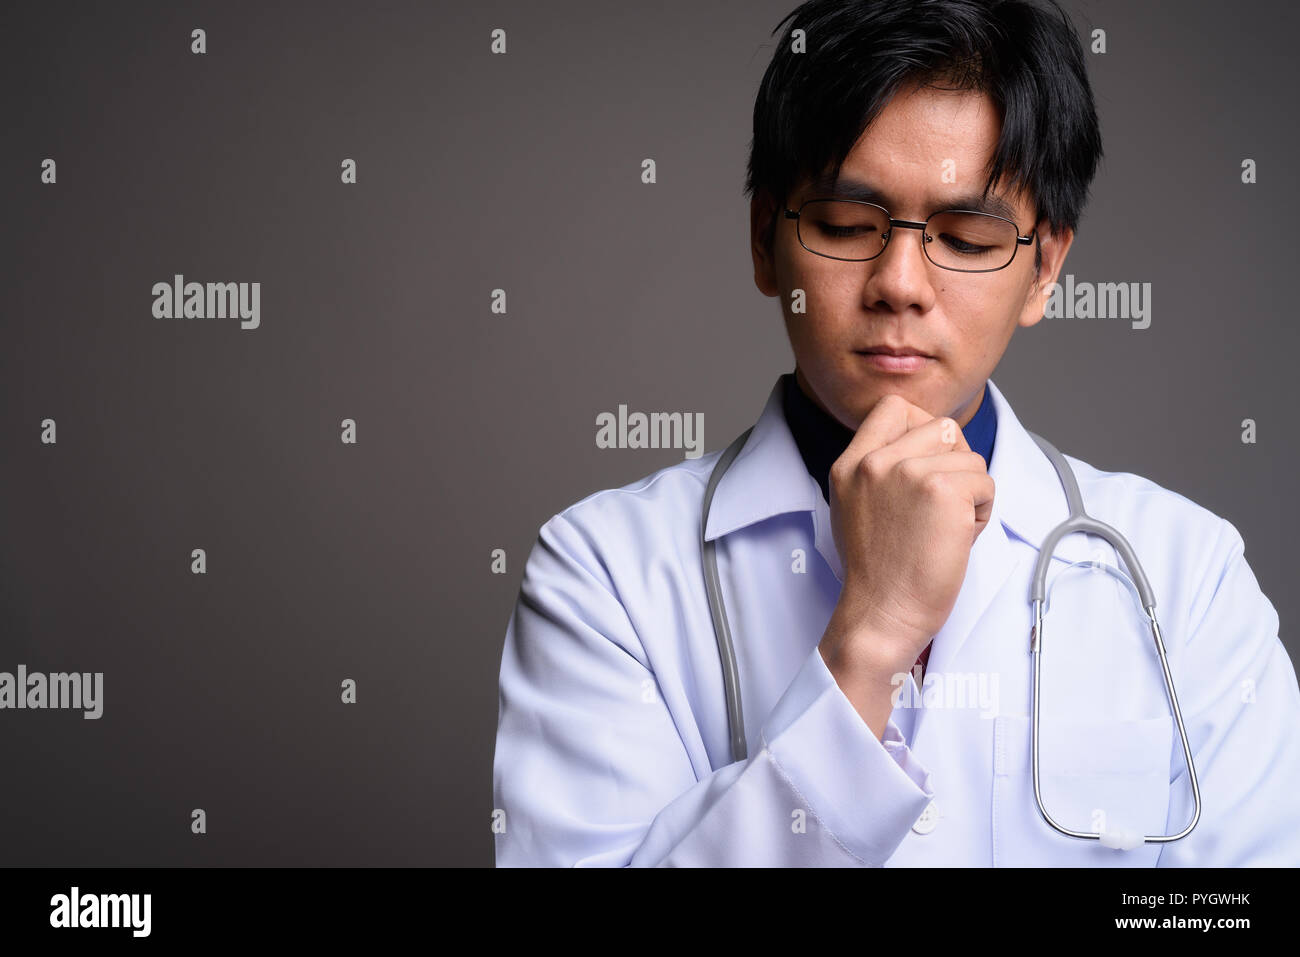 Face of young serious Asian man doctor thinking Stock Photo